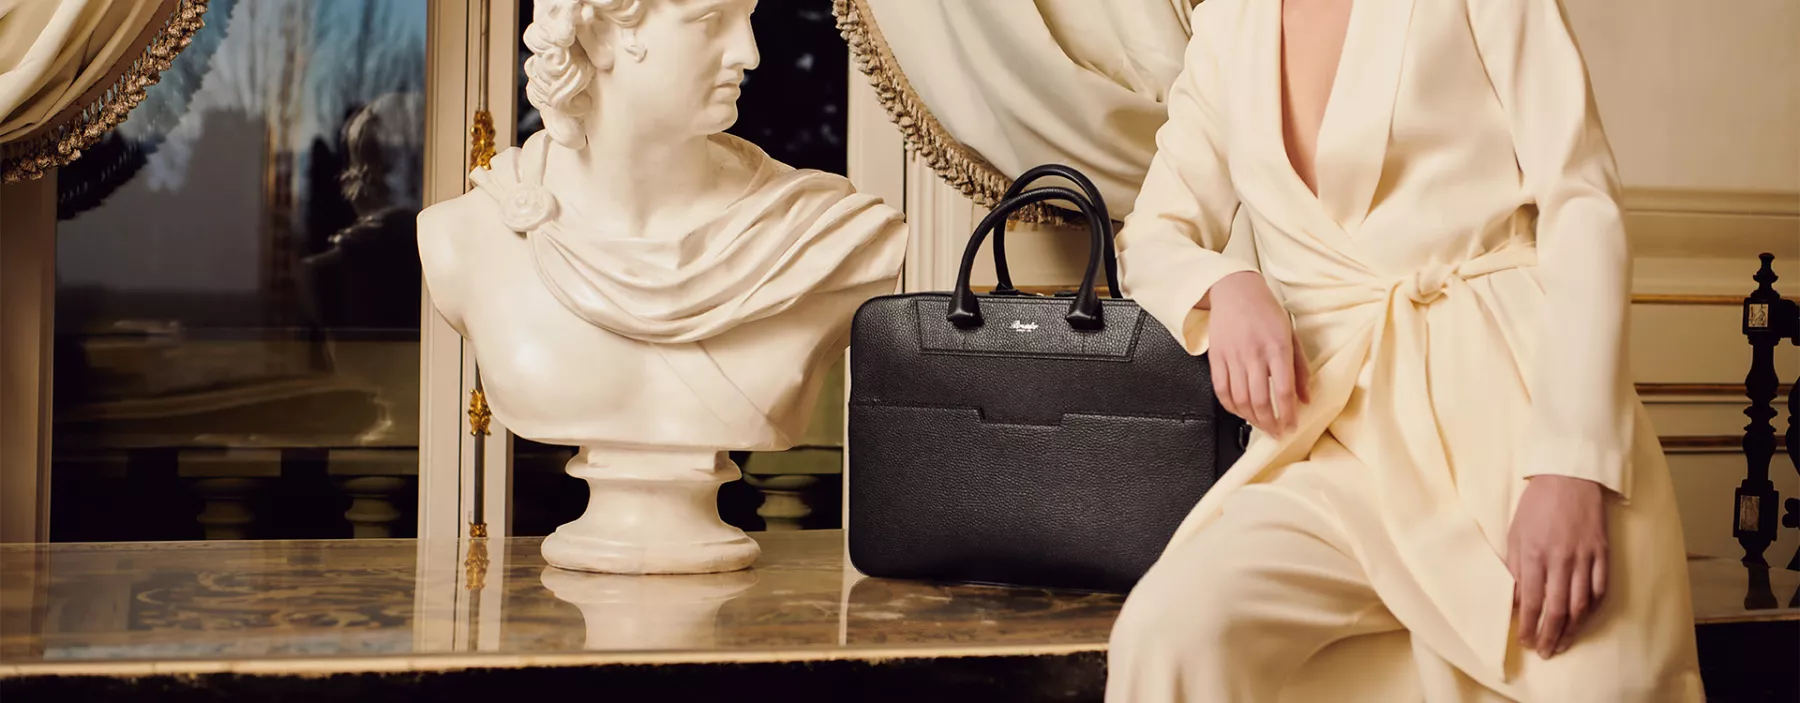 Louis Vuitton Briefcases and work bags for Women